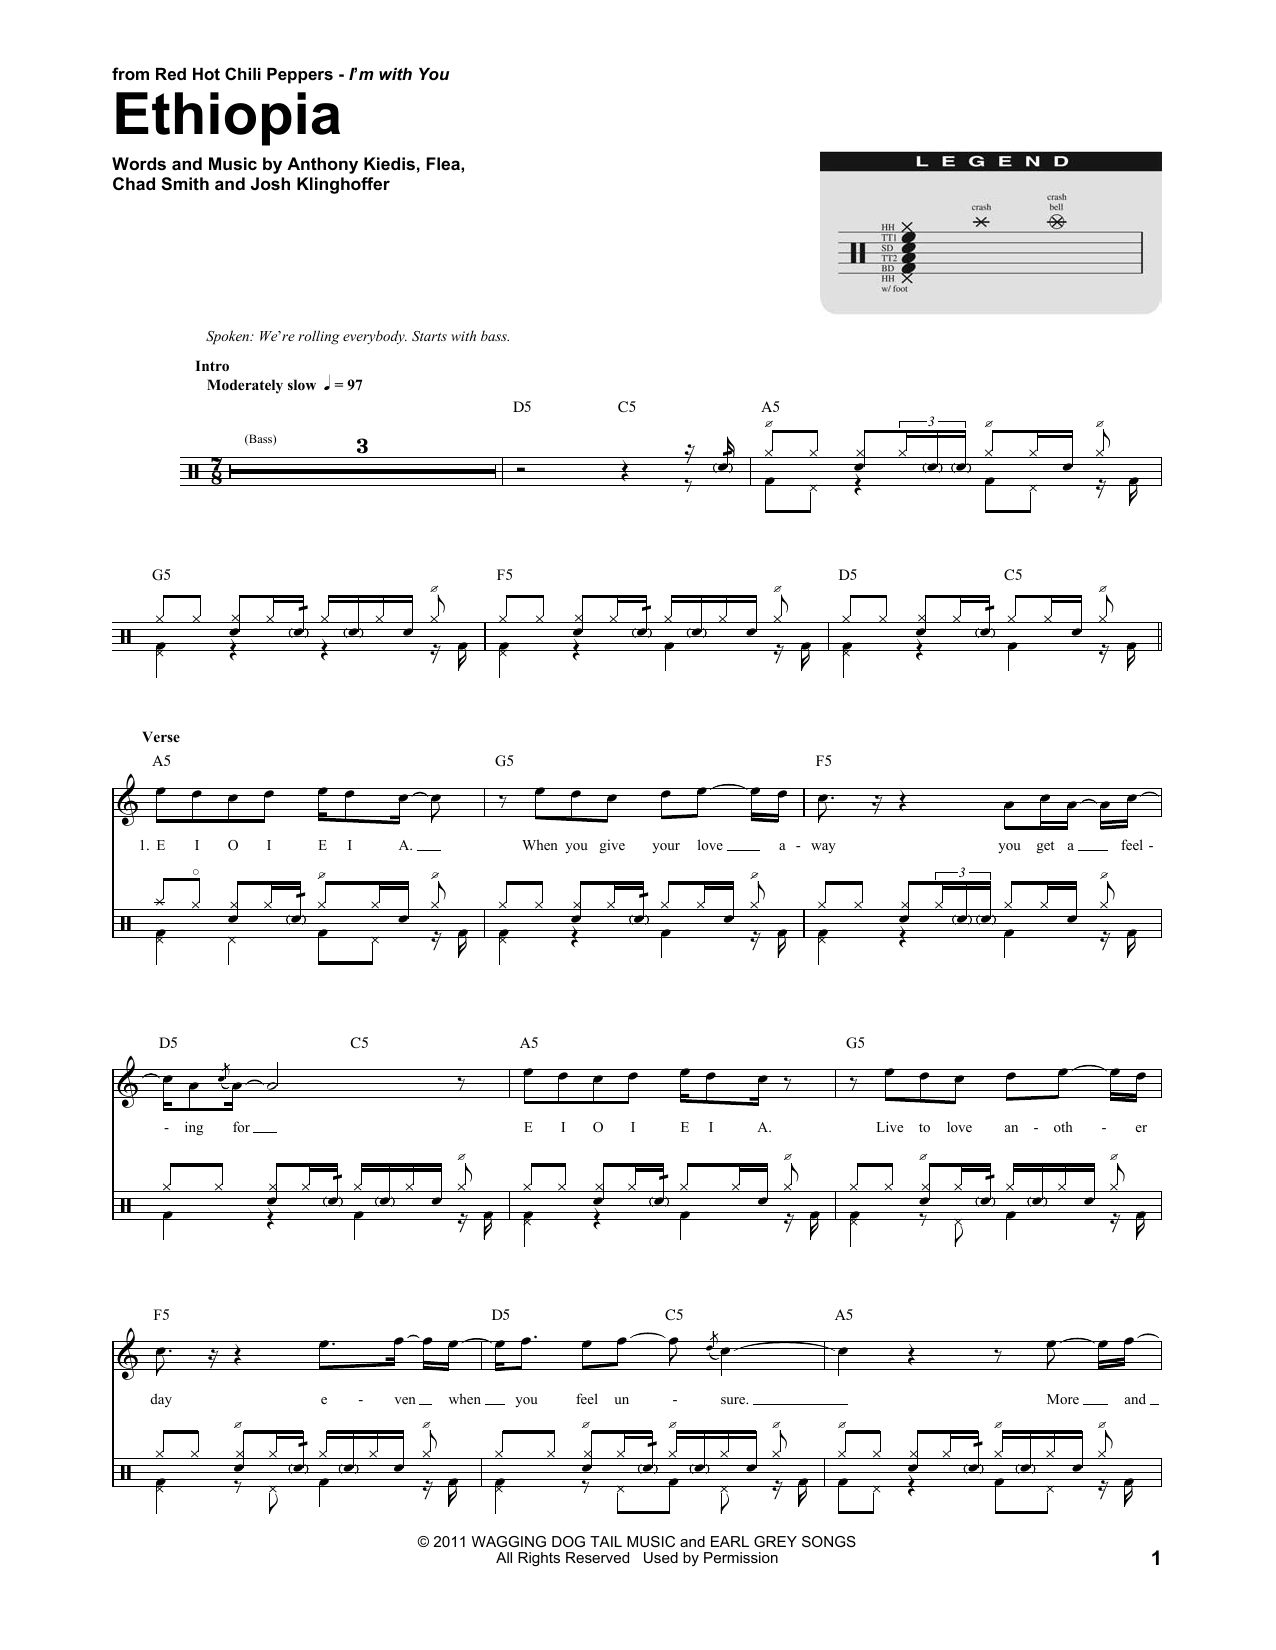 Download Red Hot Chili Peppers Ethiopia Sheet Music